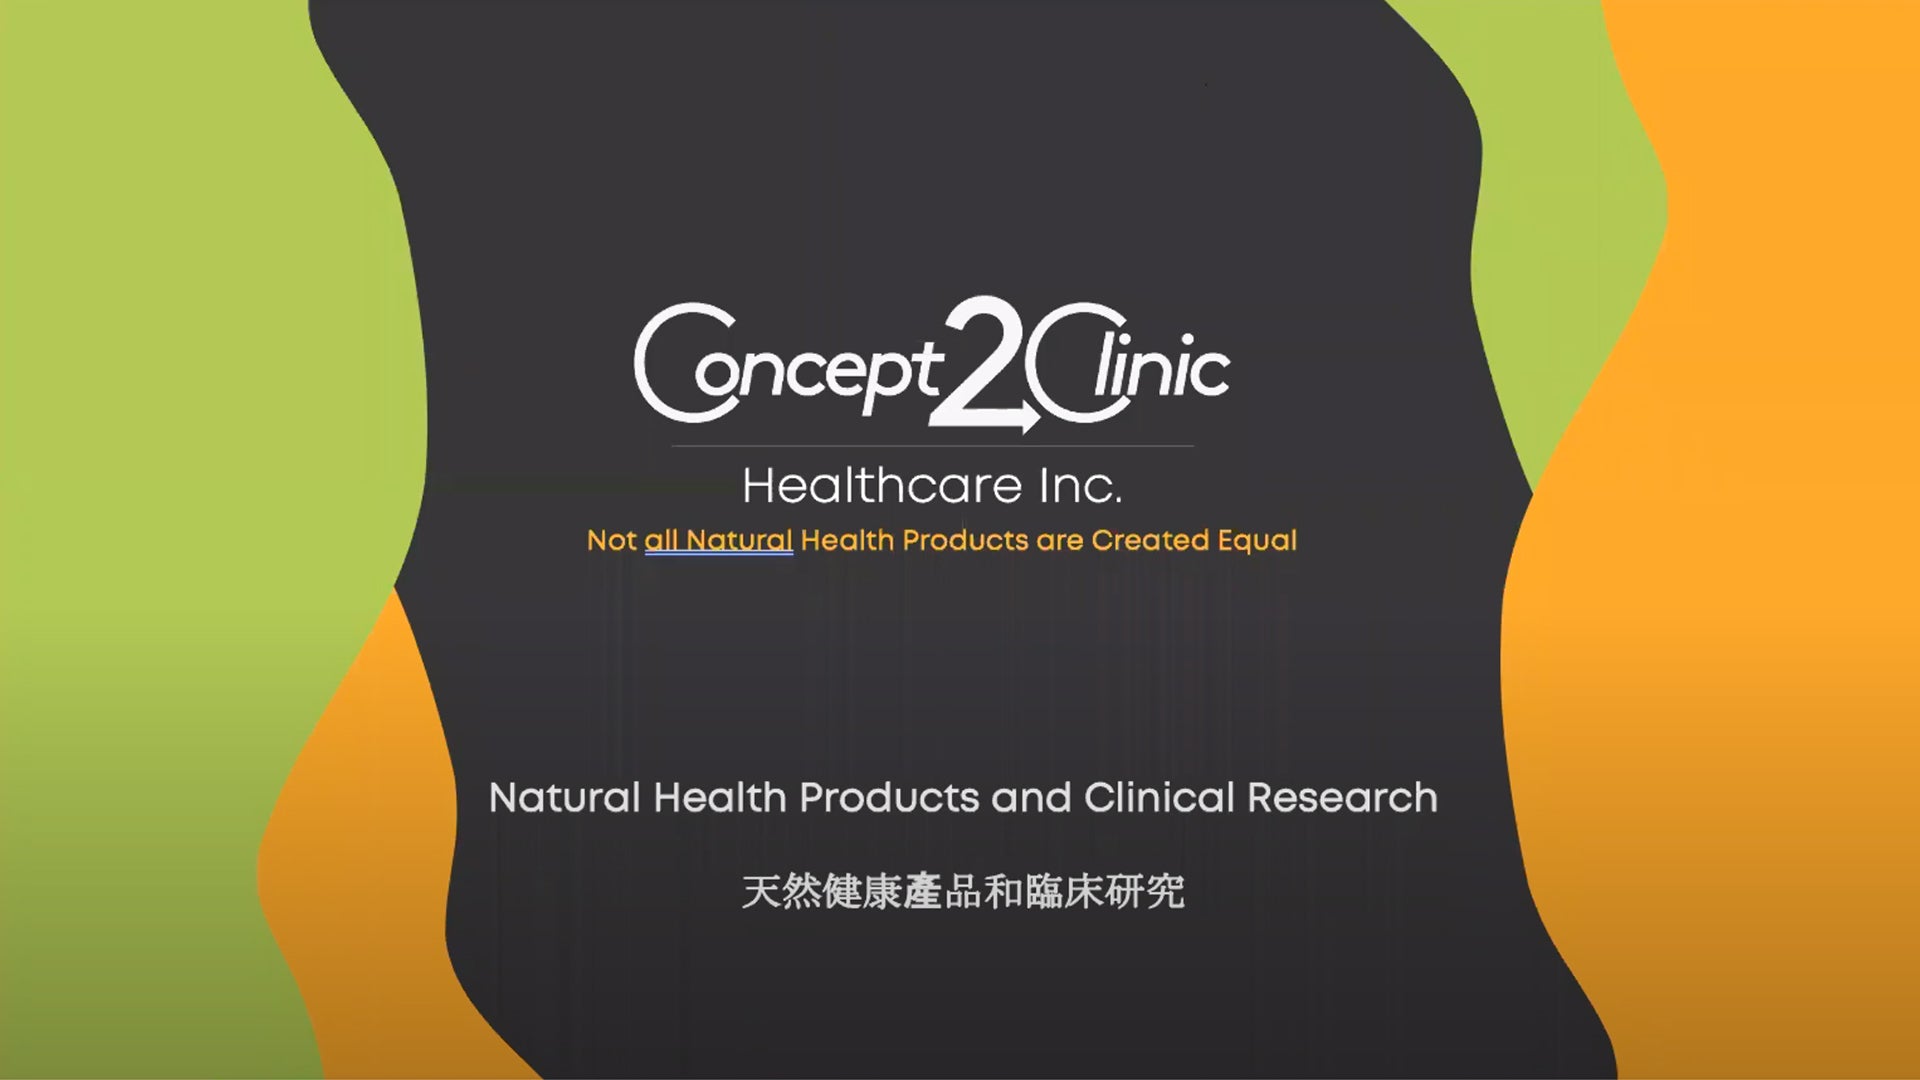 Webinar 01: Natural Health Products and Clinical Research